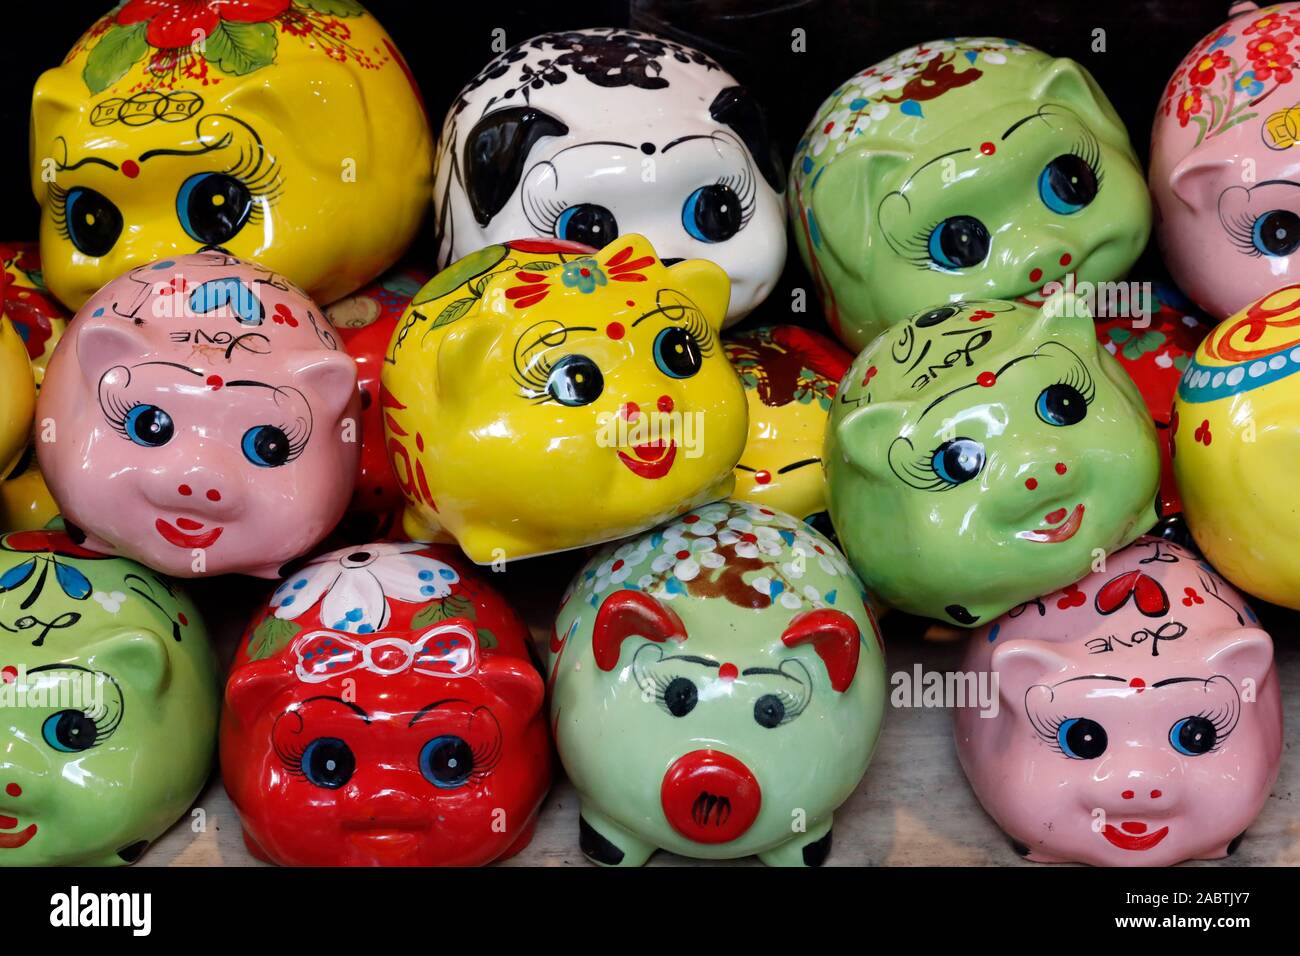 Piggy banks for the chinese year of the pig.  Hanoi. Vietnam. Stock Photo